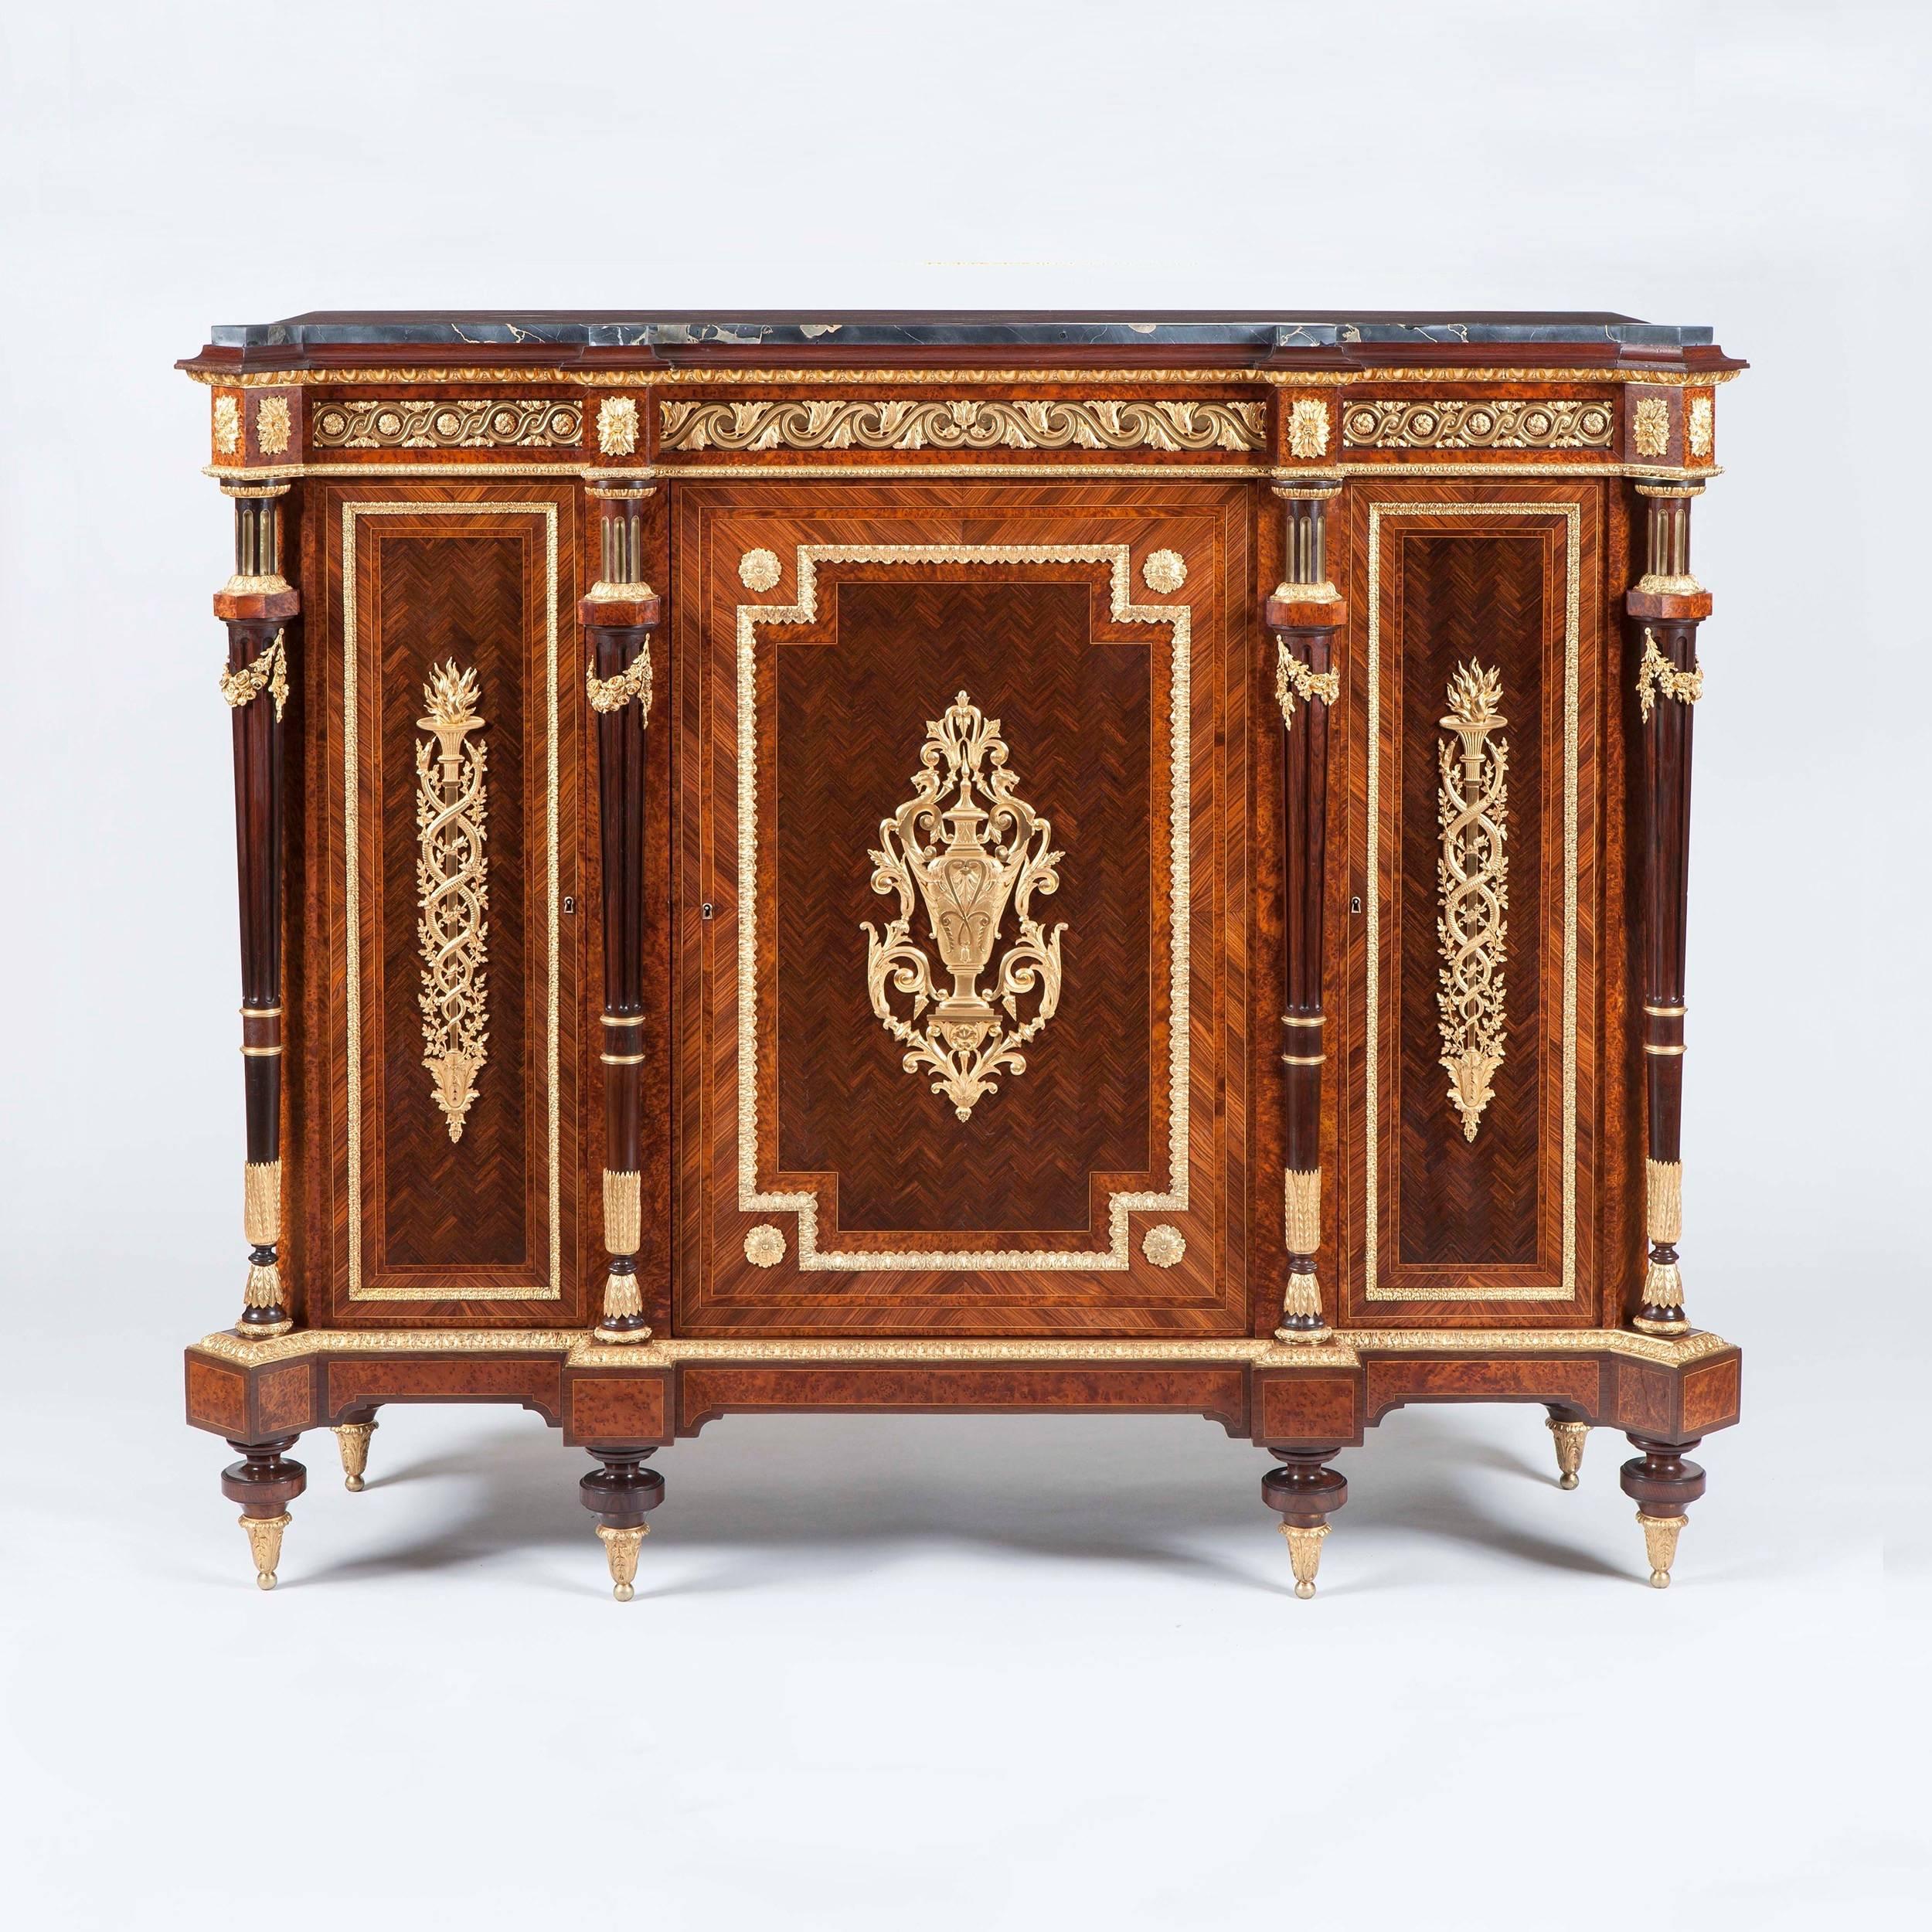 A Good Pair of Meuble d'Hauteurs d'Appui By Henri Picard of the Napoleon III Period

Constructed using fine kingwood, thuyawood and amaranth veneers laid in complex book matched and chevron parquetry, and dressed with excellent gilt bronze mounts